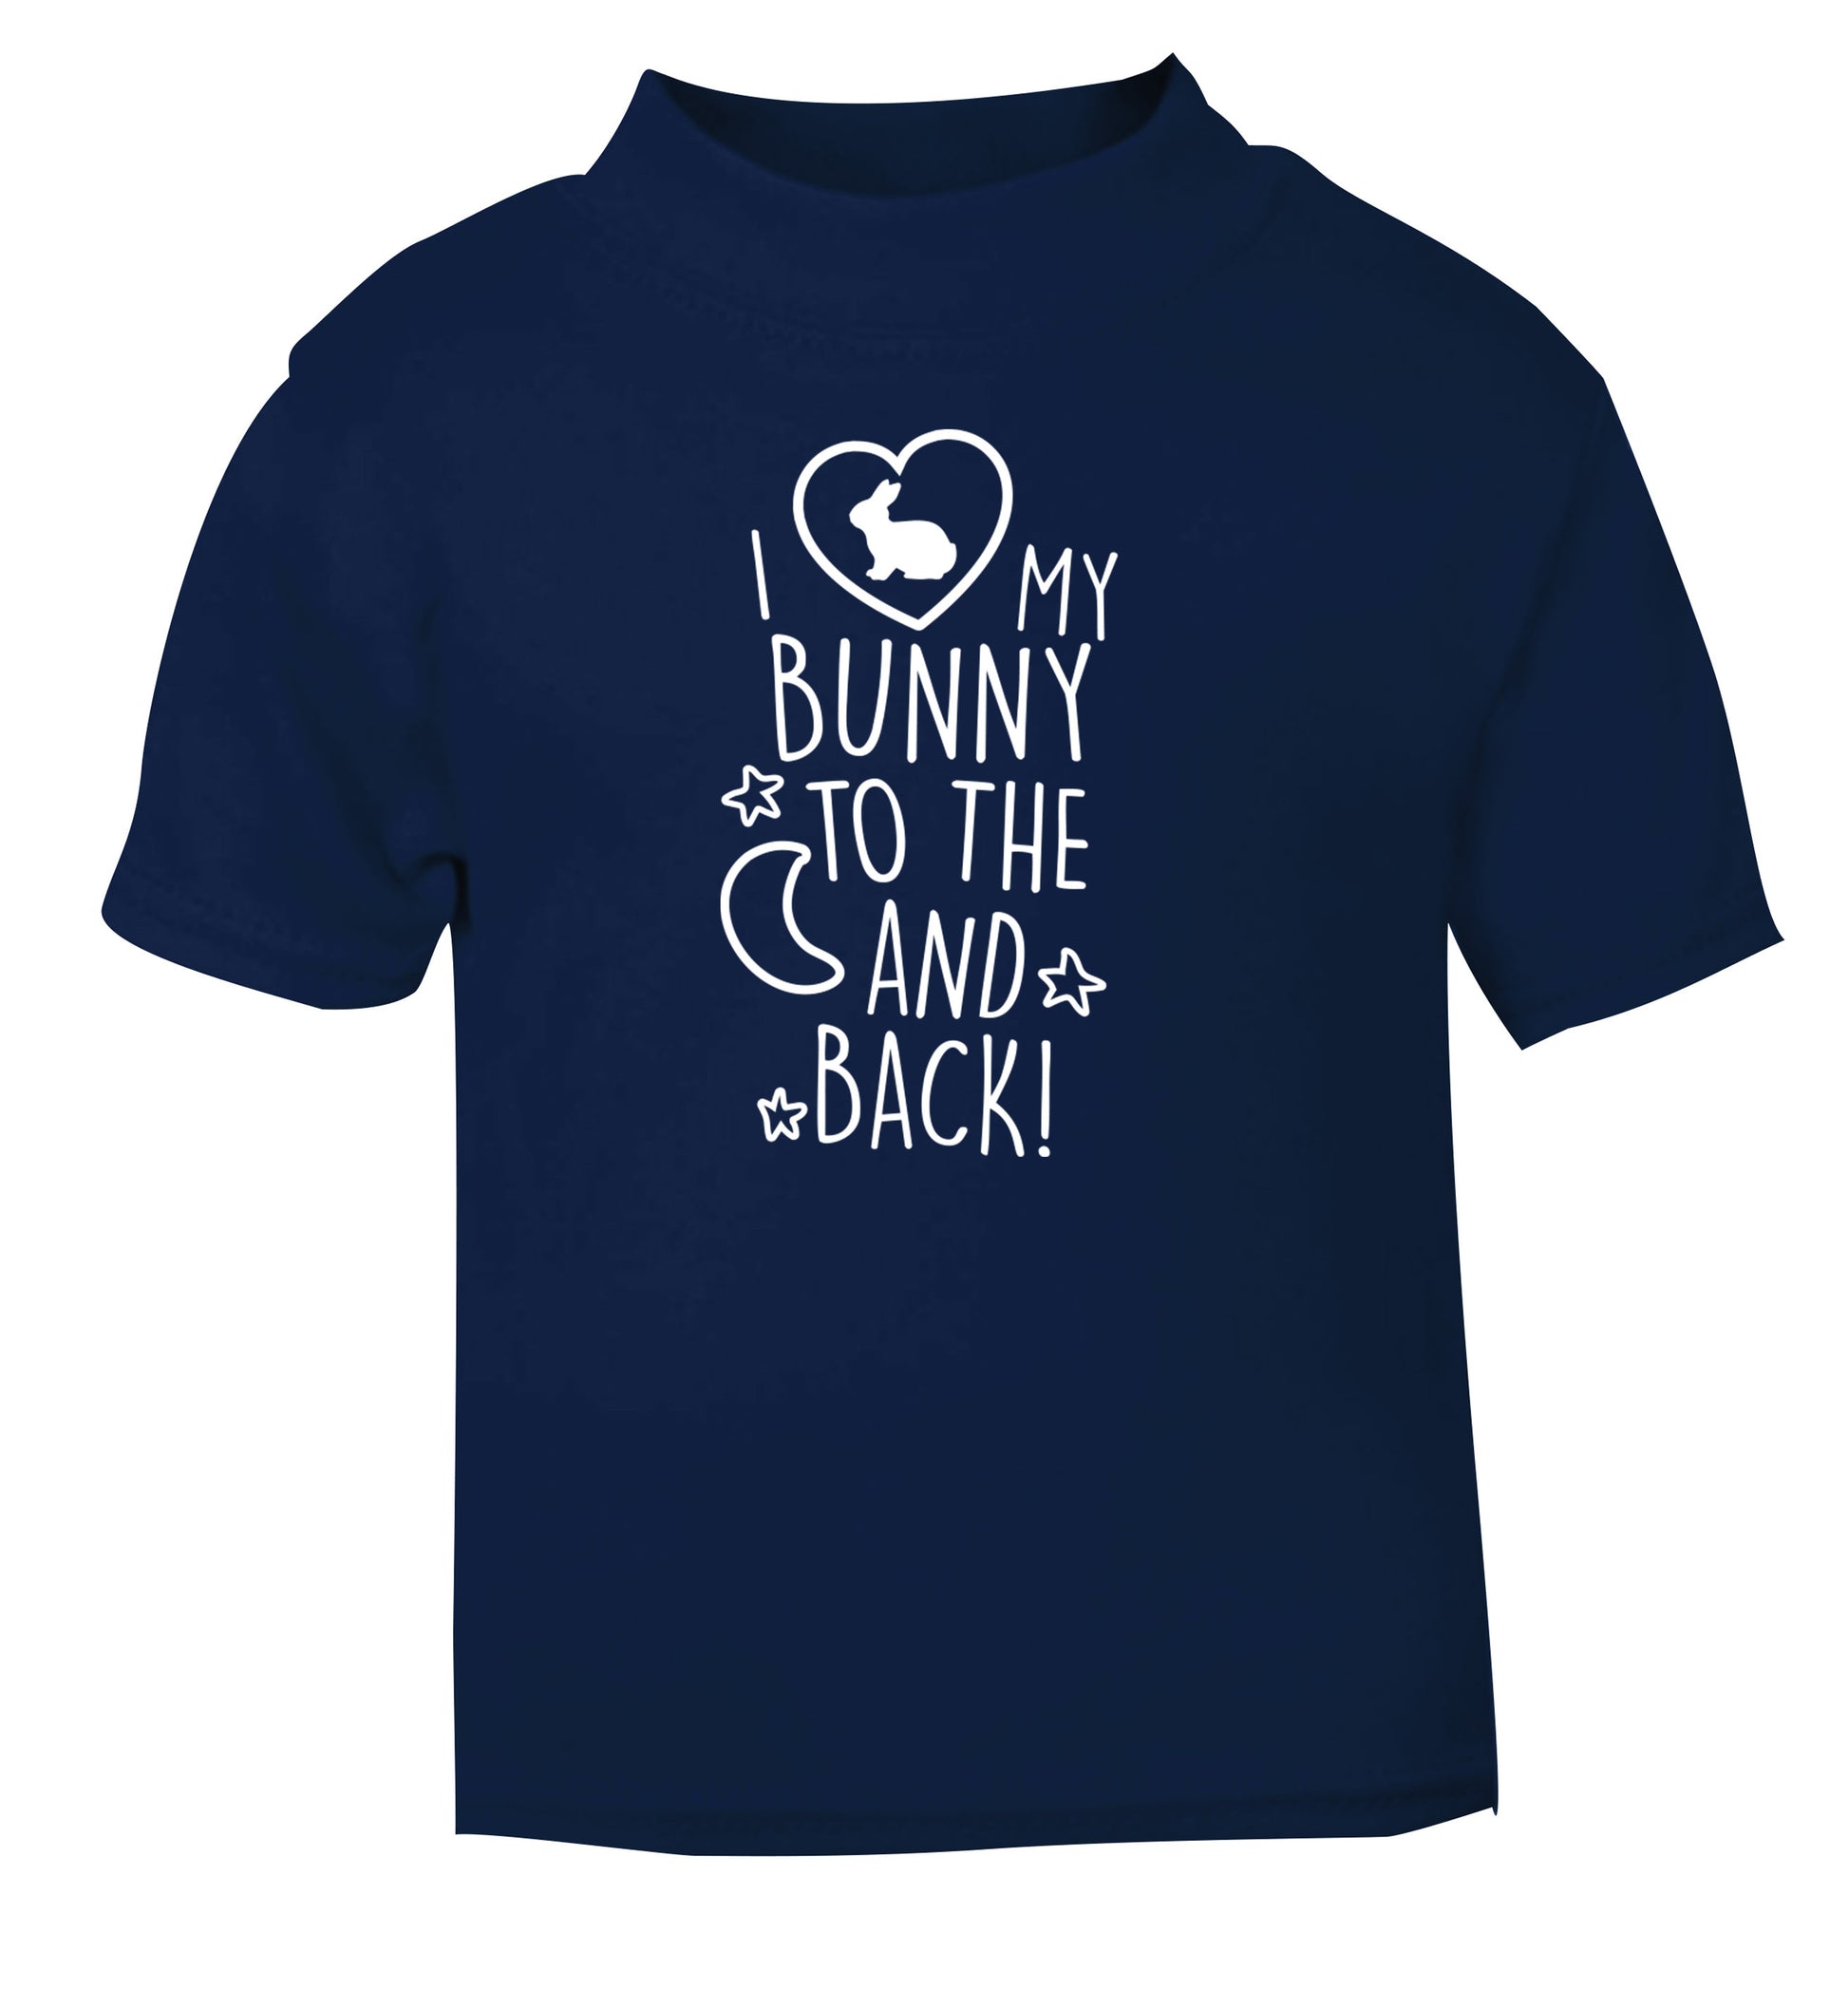 I love my bunny to the moon and back navy Baby Toddler Tshirt 2 Years